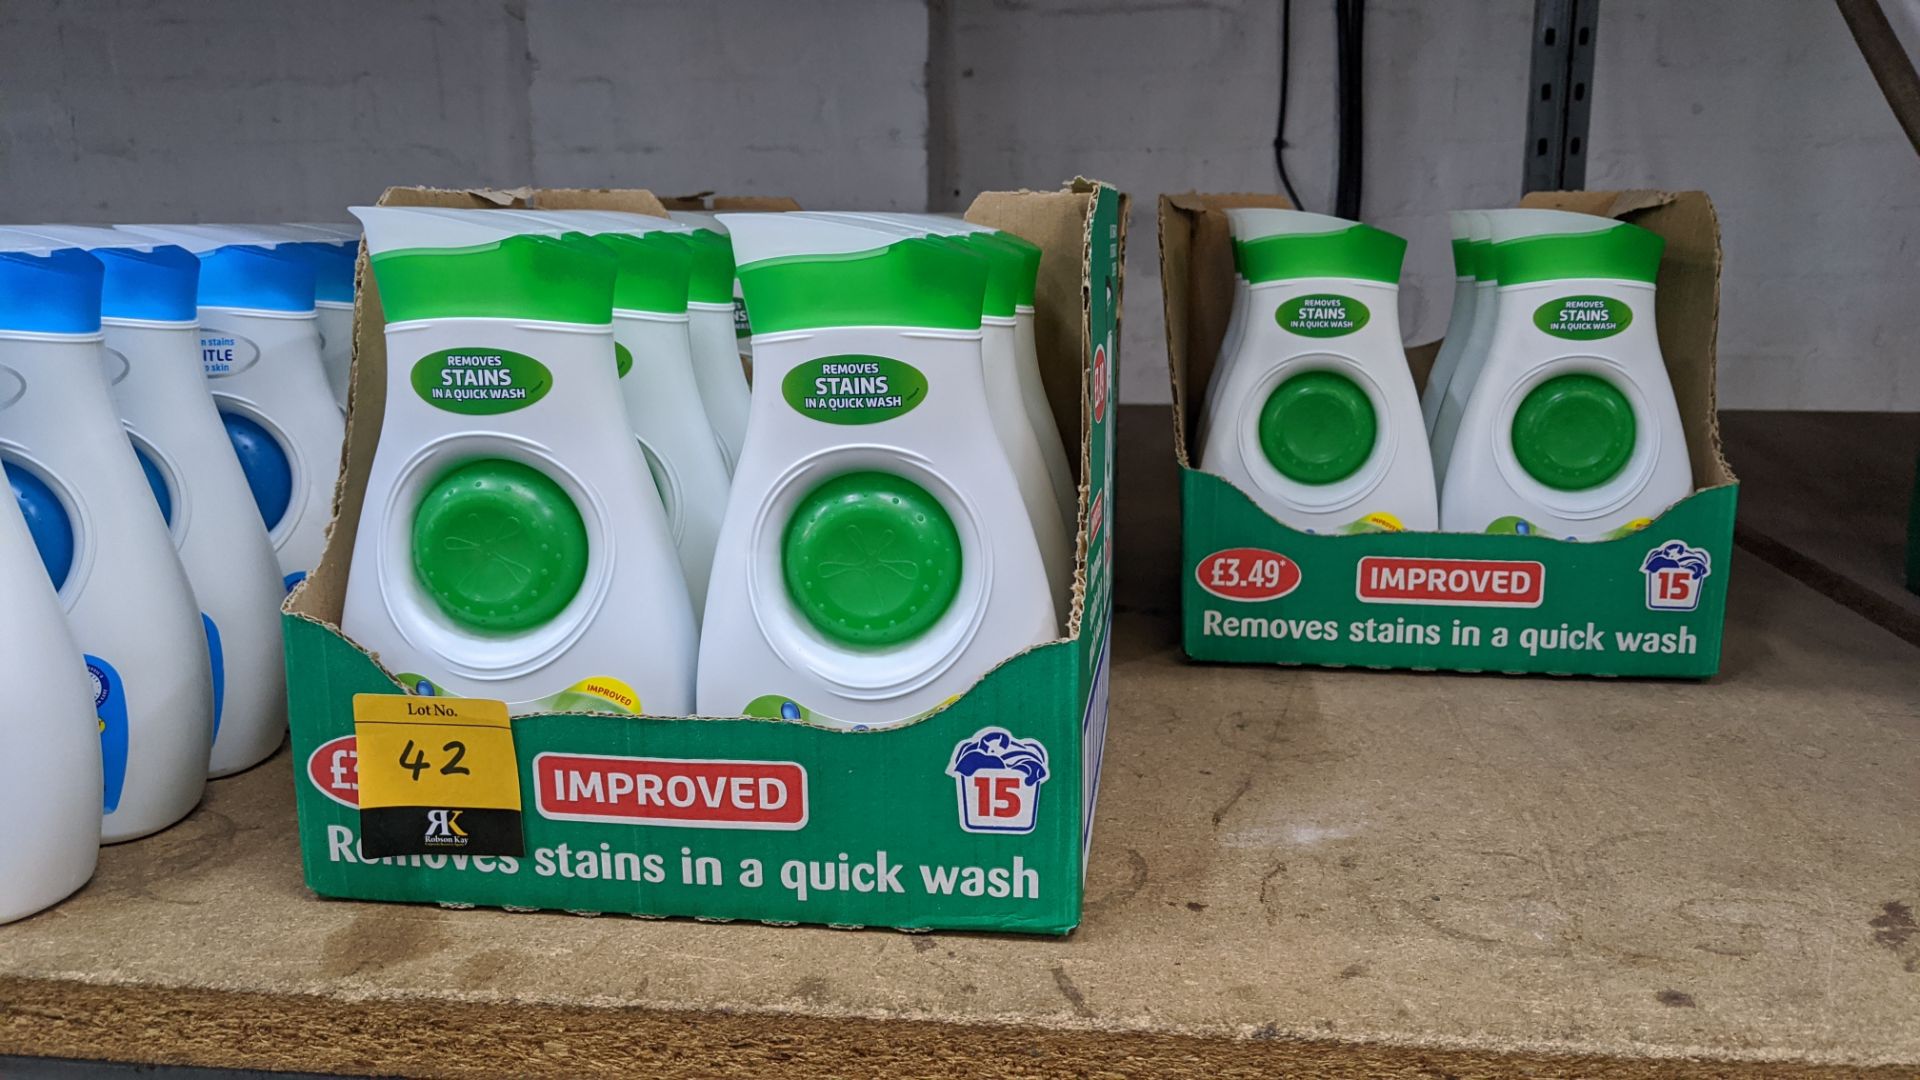 18 off 525ml bottles of Persil Bio liquid detergent . IMPORTANT – DO NOT BID BEFORE READING THE